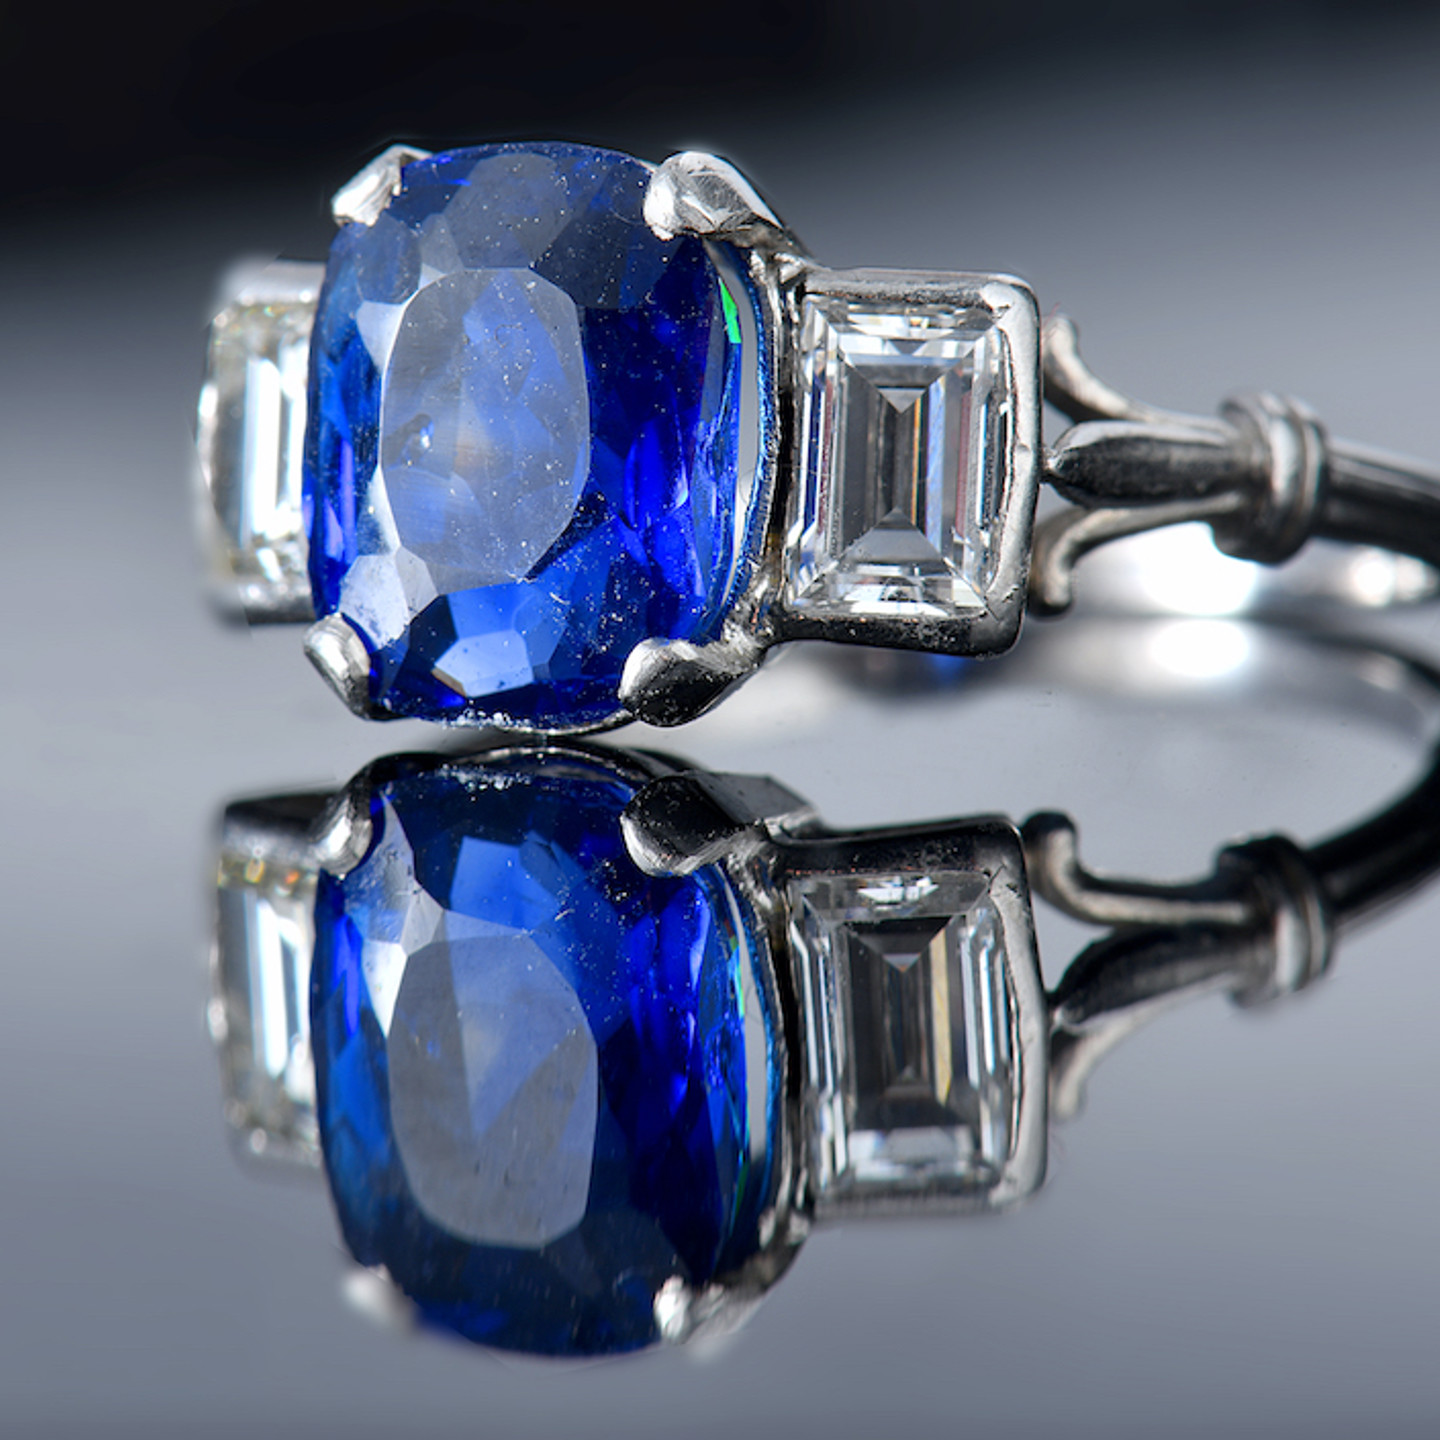 A Platinum Ring Set With A Cushion Cut Sapphire Of Approximately 3.1Cts. Sold For £4,600